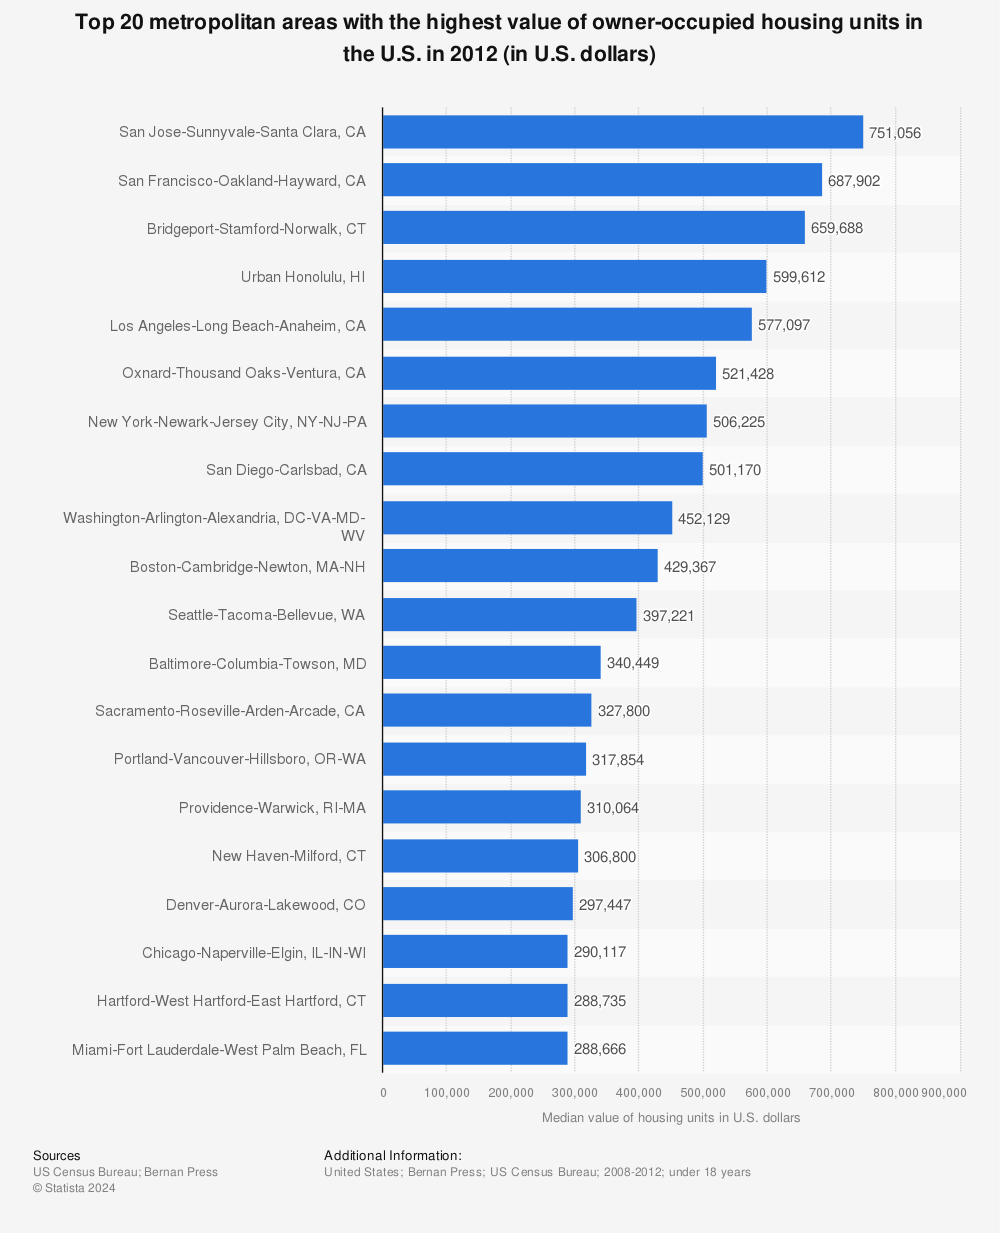 Statistic: Top 20 metropolitan areas with the highest value of owner-occupied housing units in the U.S. in 2012 (in U.S. dollars) | Statista